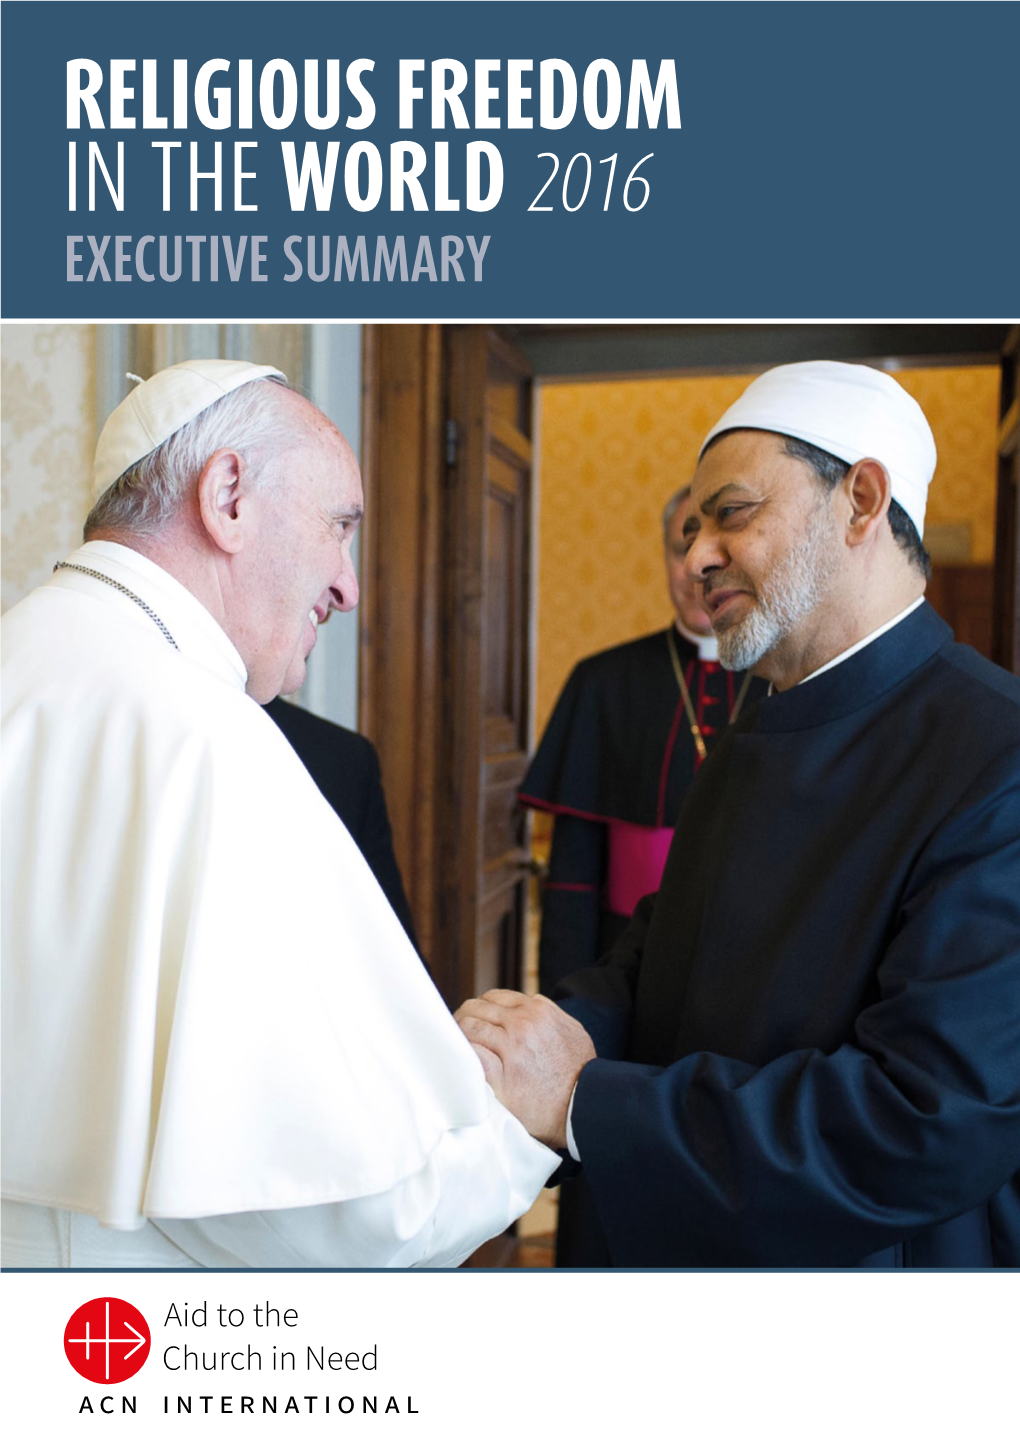 Religious Freedom in the World 2016 Executive Summary Religious Freedom in the World Executive Summary 2016 Religious Freedom in the World Executive Summary 2016